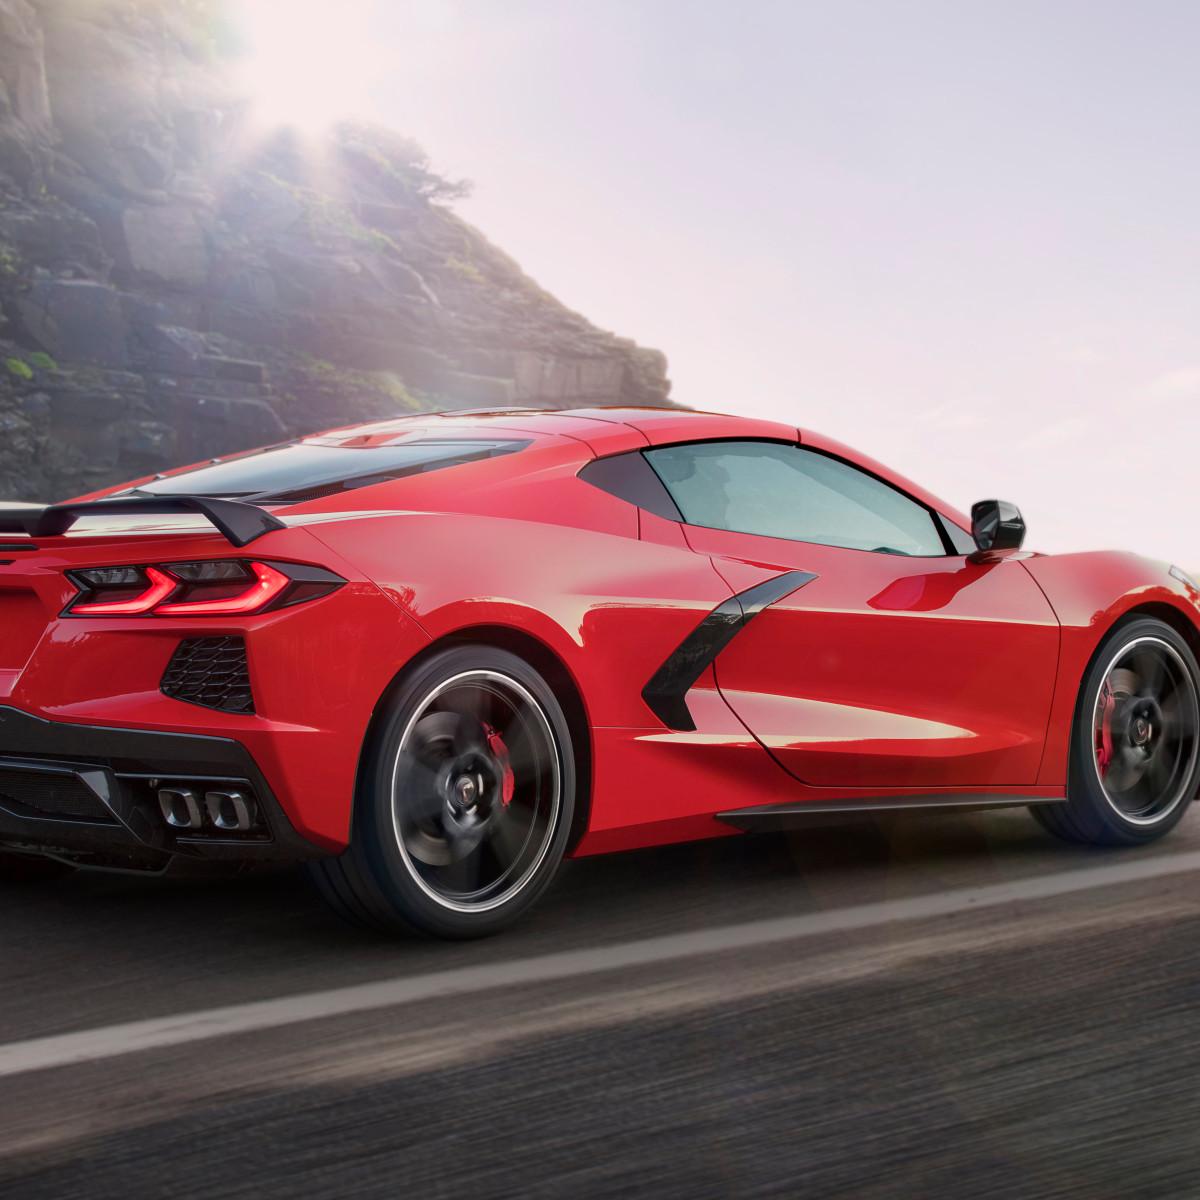 Everything You Should Know About the 2020 Chevrolet Corvette Stingray